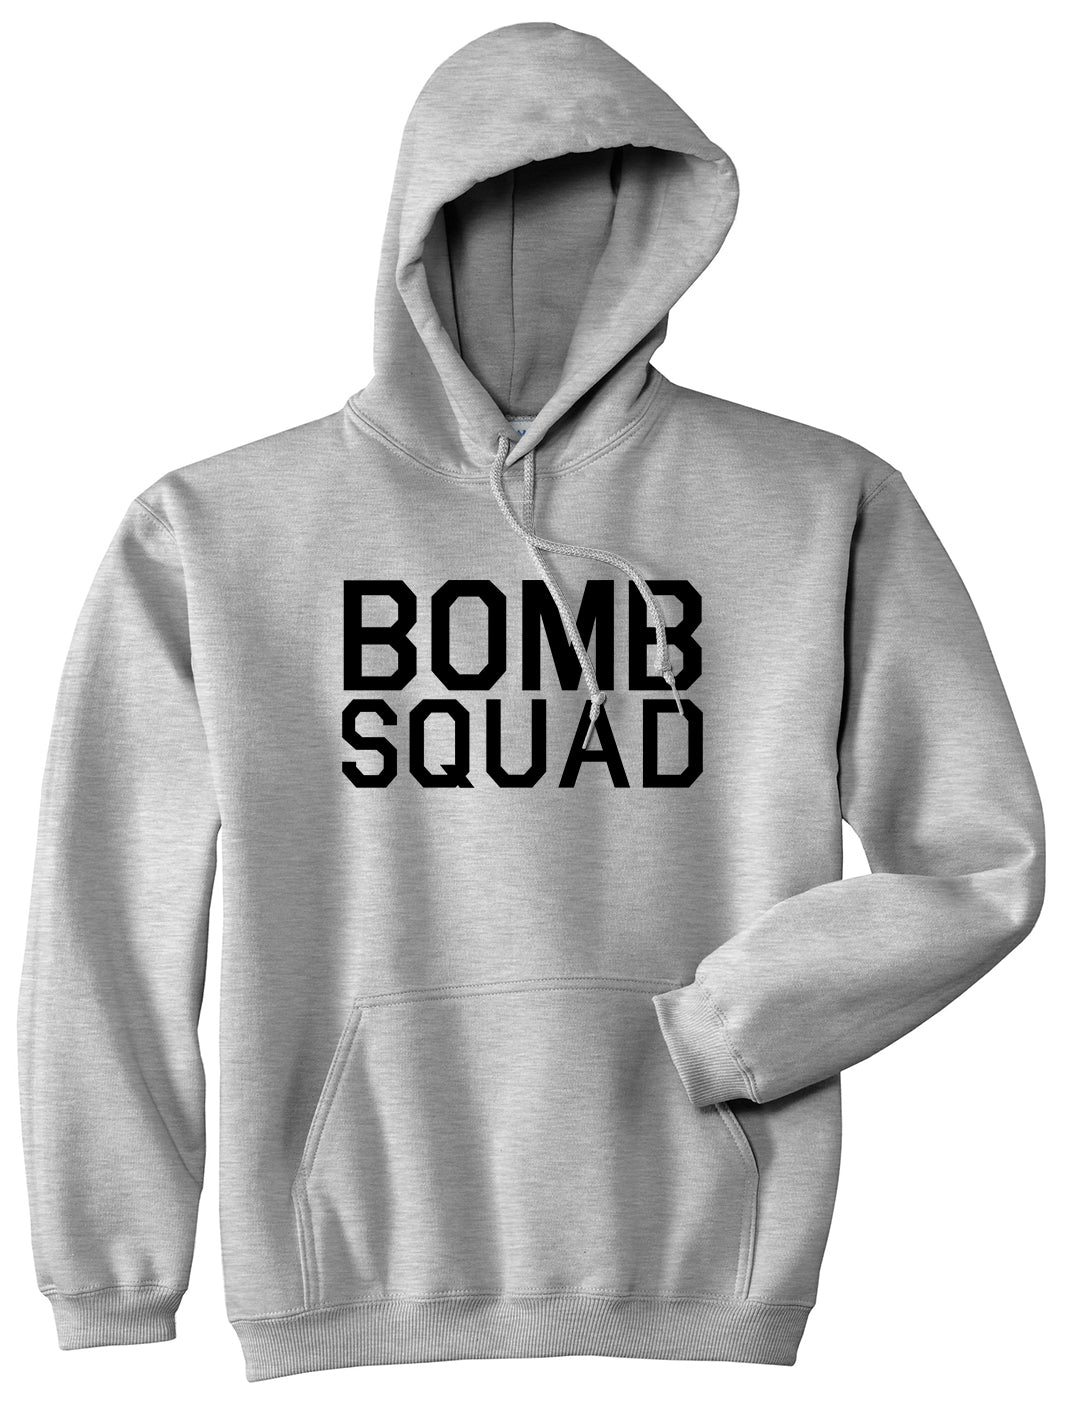 Bomb Squad Grey Pullover Hoodie by Kings Of NY